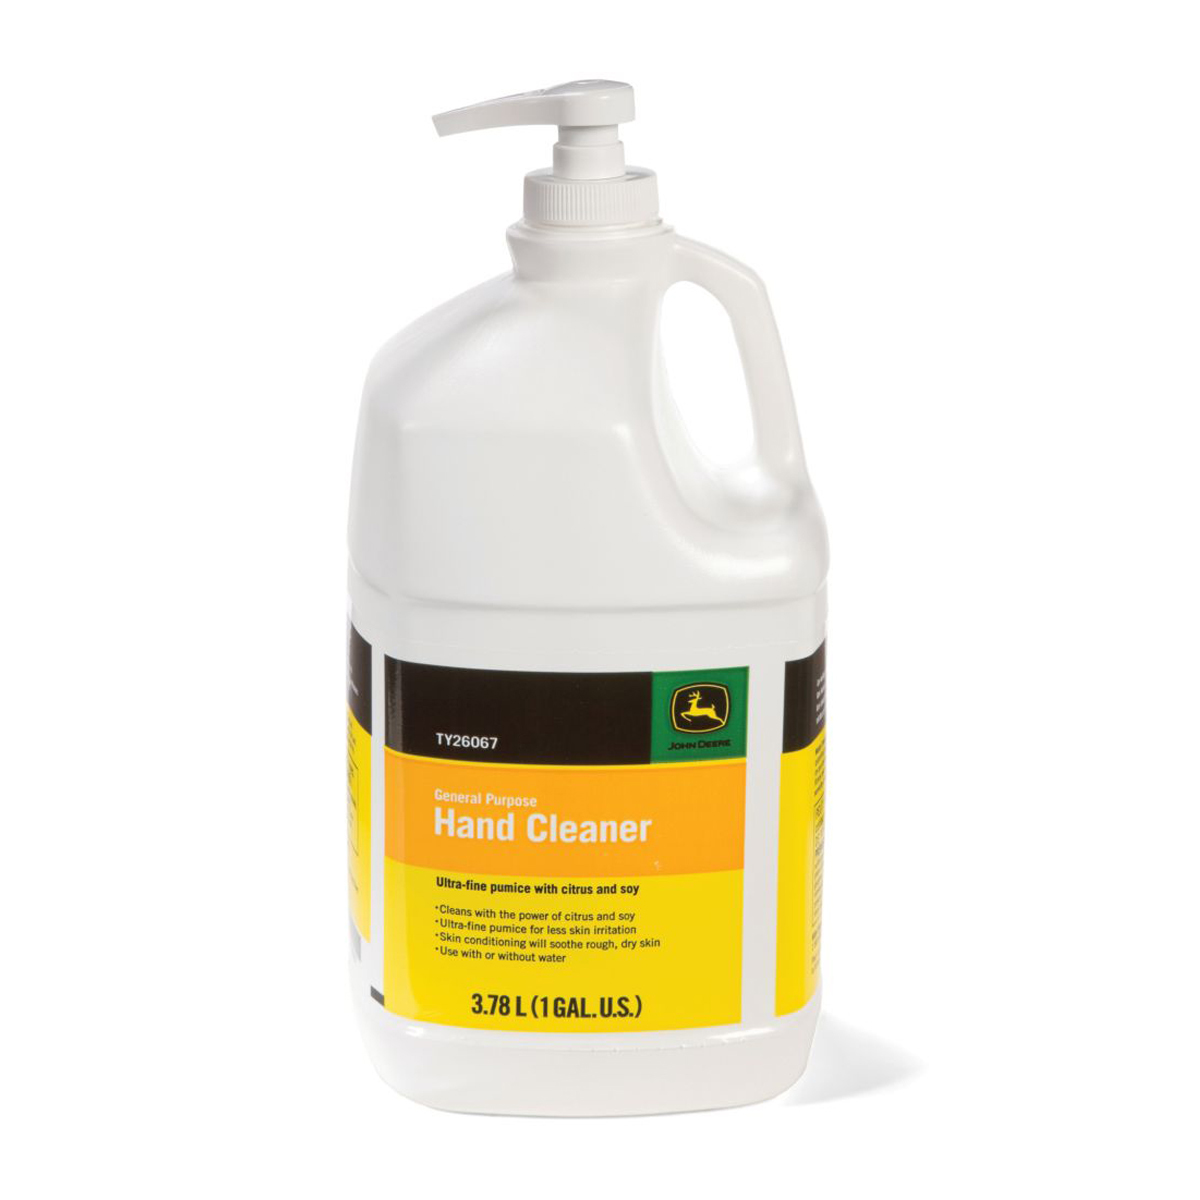 Hand Cleaner with Pumice, 1 Gallon